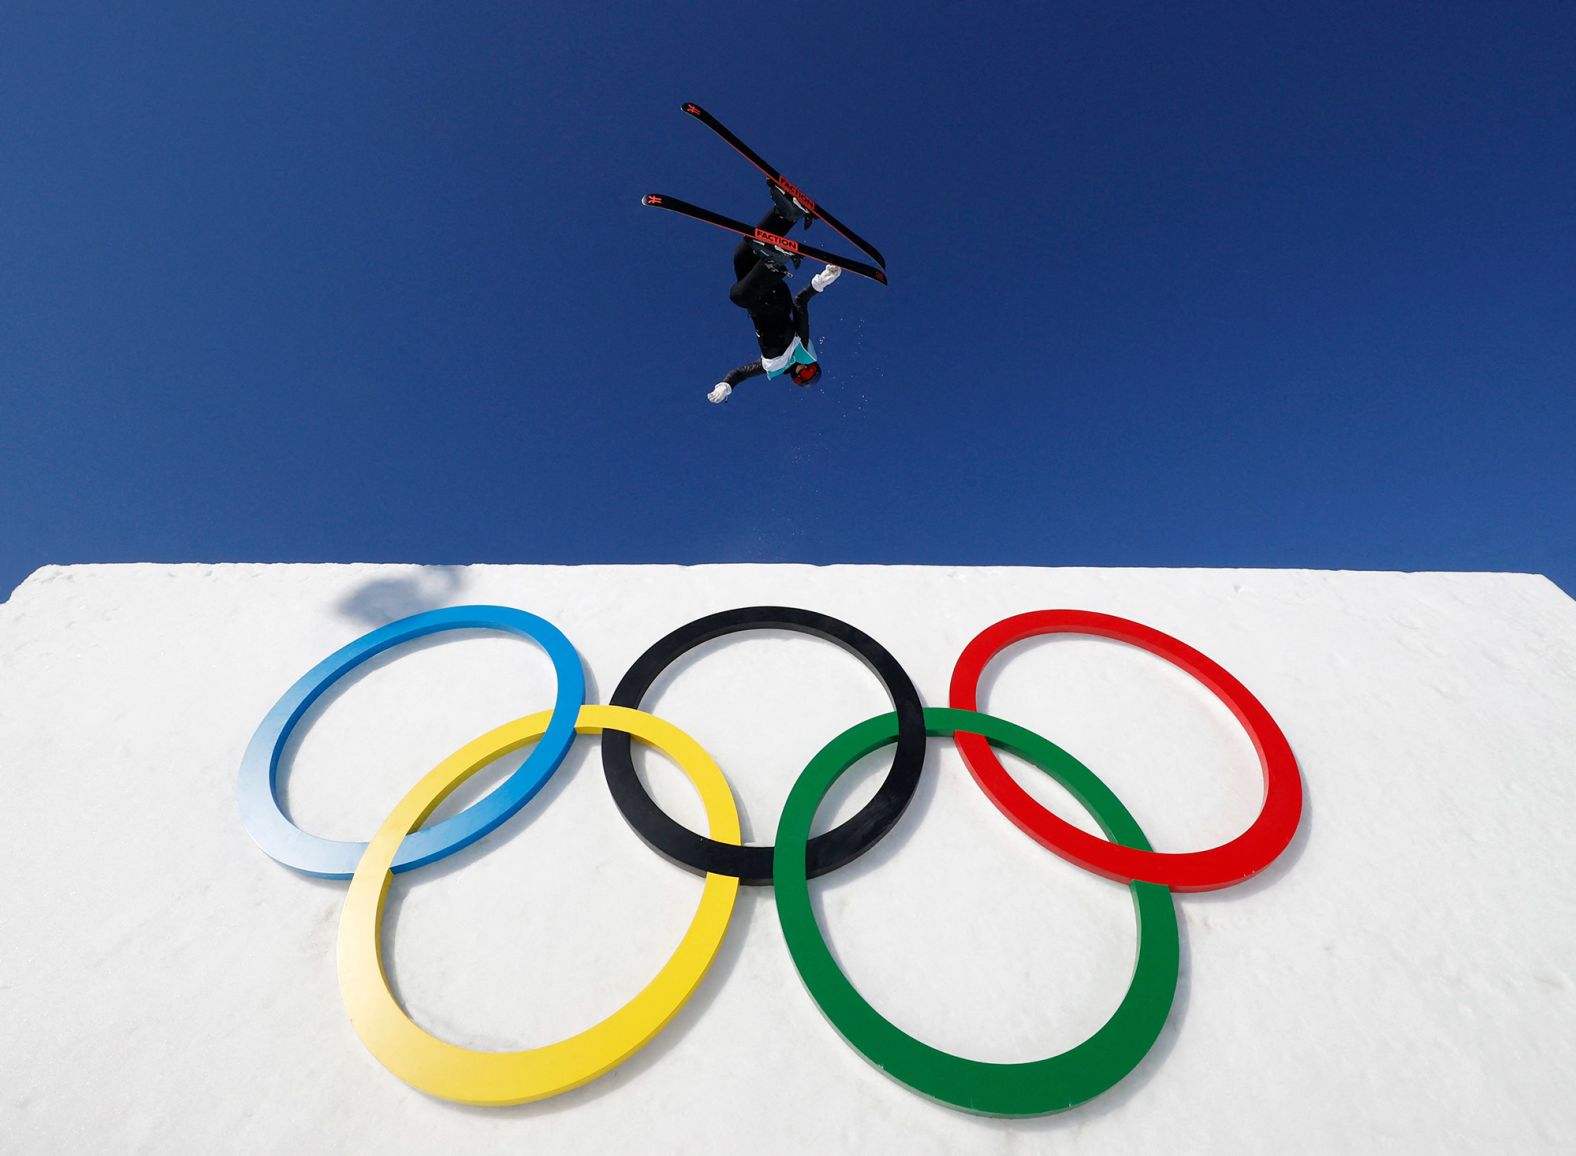 China's Eileen Gu makes her final run in the big air competition on February 8. Her score on that run lifted her past France's Tess Ledeux <a href="index.php?page=&url=https%3A%2F%2Fwww.cnn.com%2Fworld%2Flive-news%2Fbeijing-winter-olympics-02-08-22-spt%2Fh_d2536644fba8daccd78050d589b7f736" target="_blank">to win the gold medal.</a>